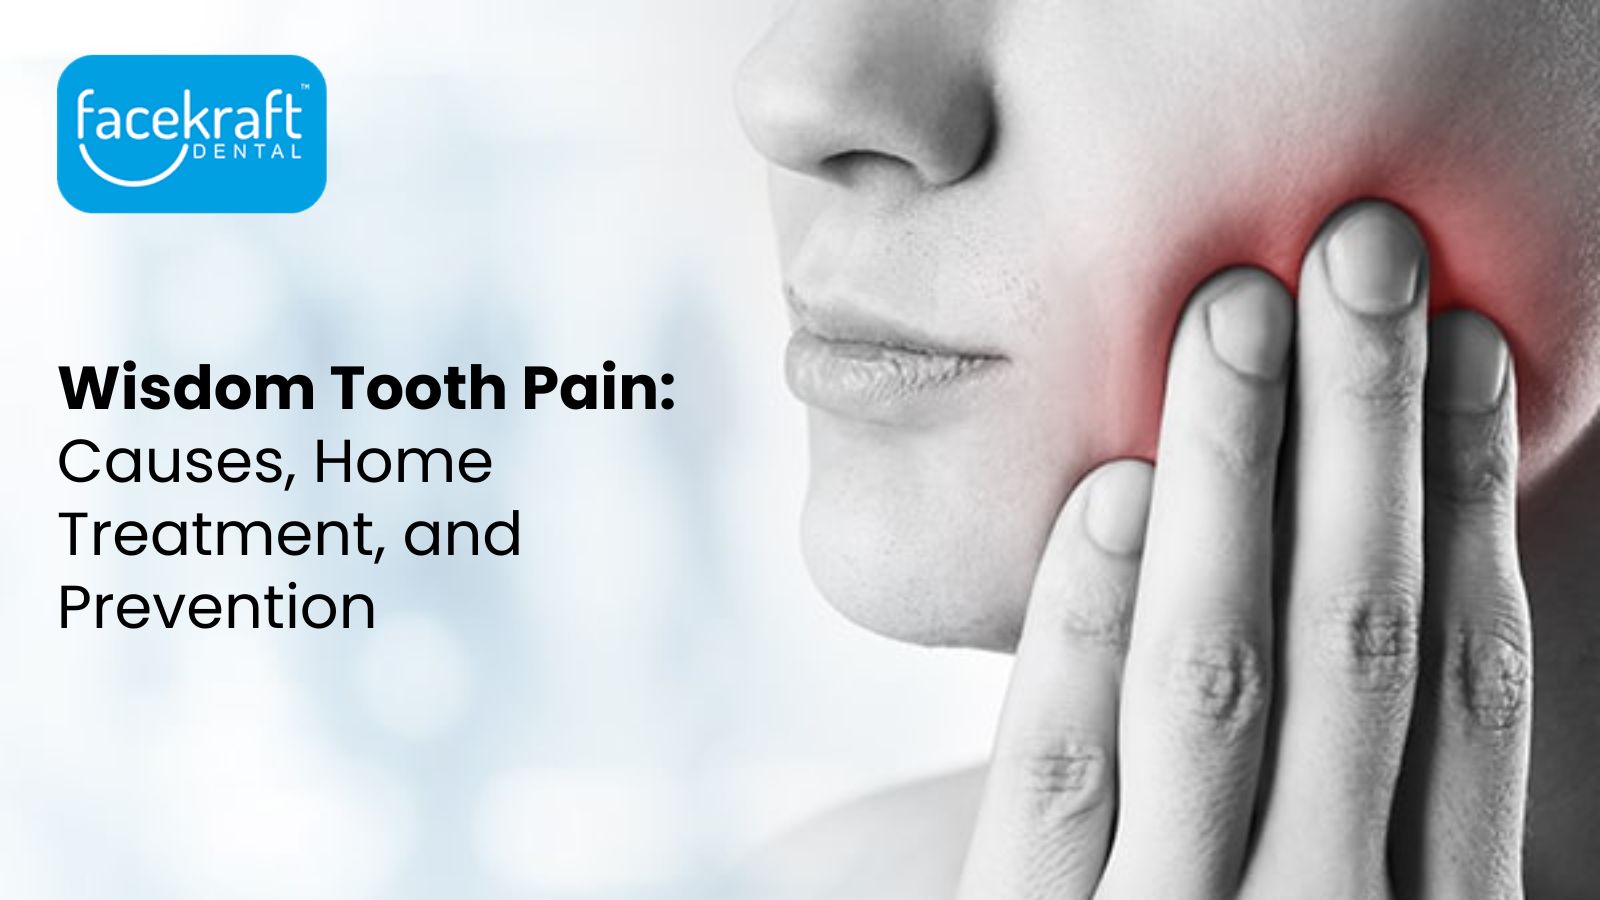 Wisdom Tooth Pain: Causes, Home Treatment, and Prevention